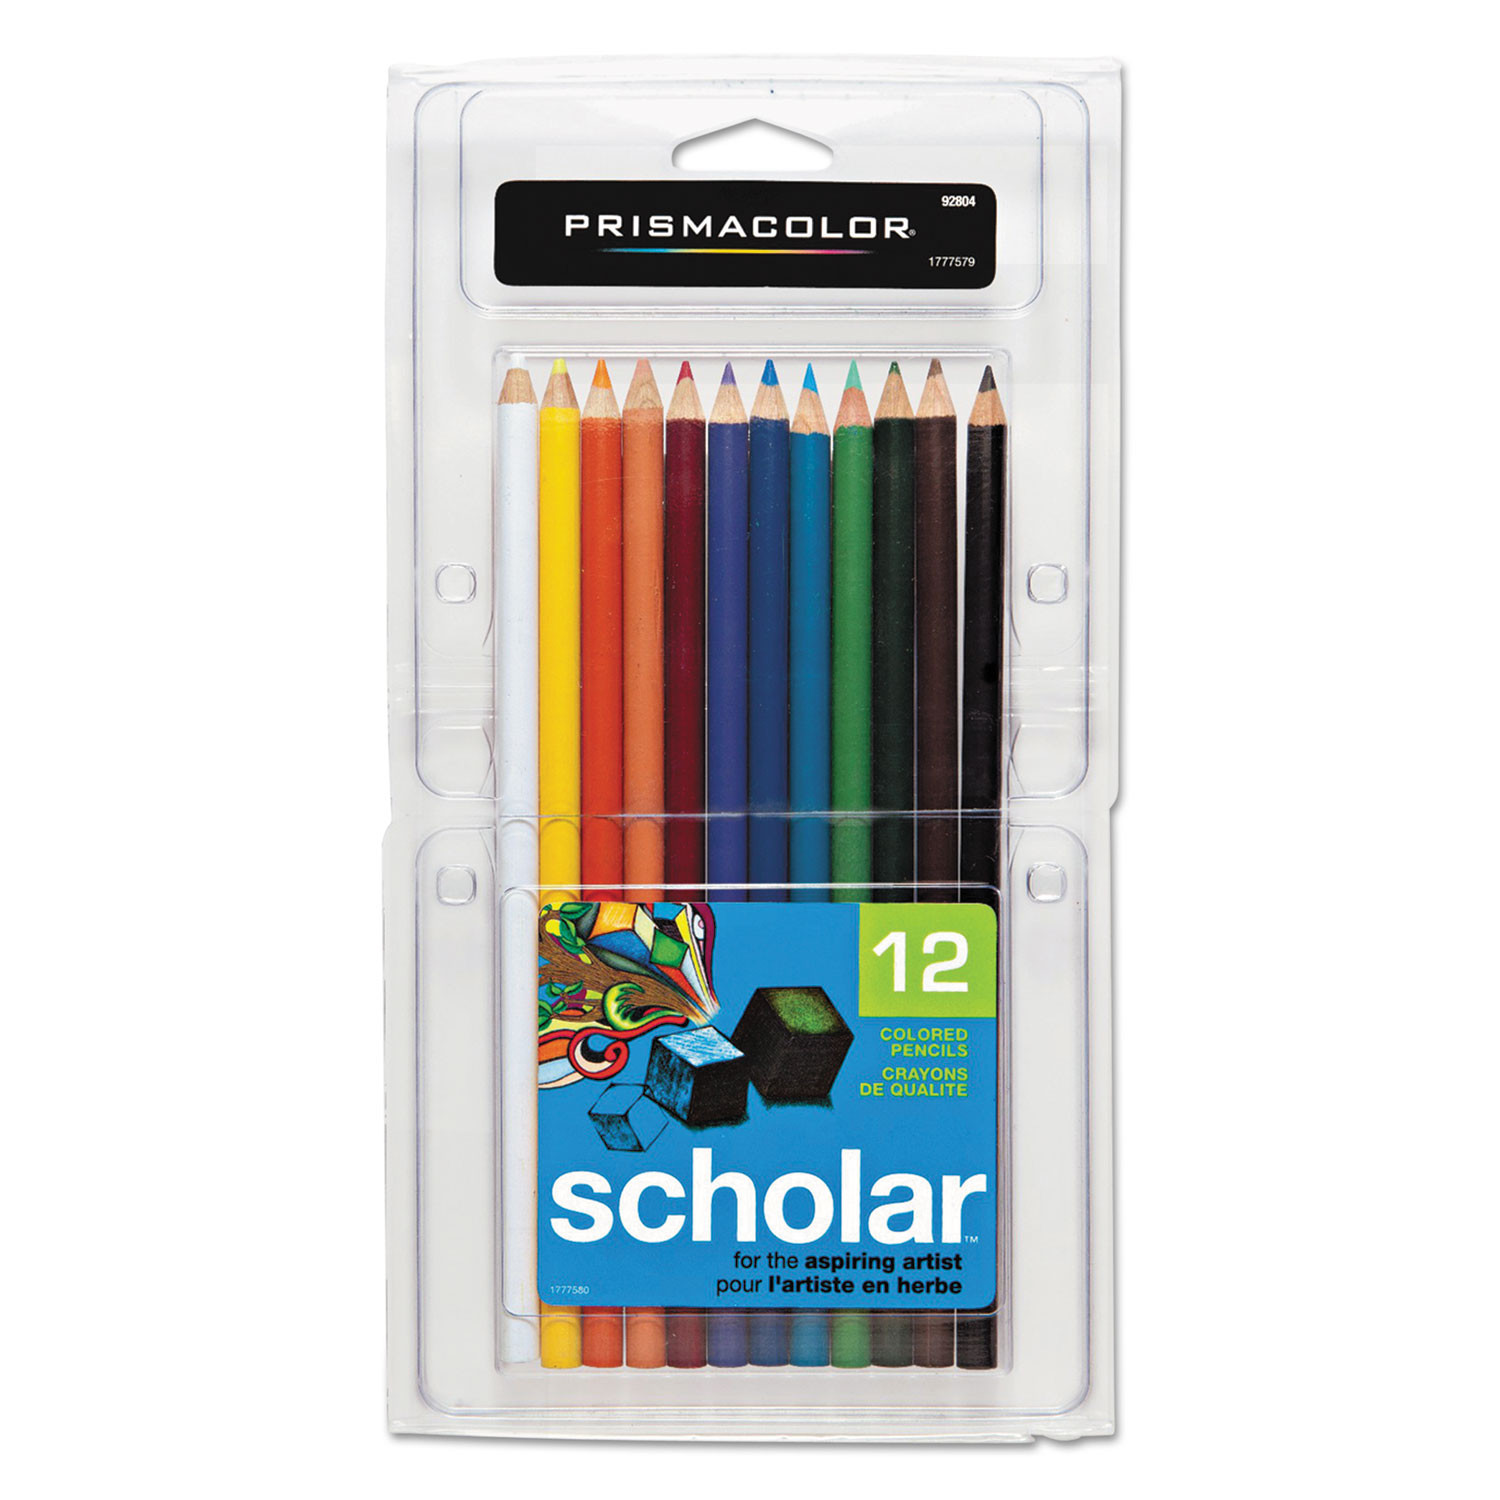 Prang Duo-Color Colored Pencils - Set of 24